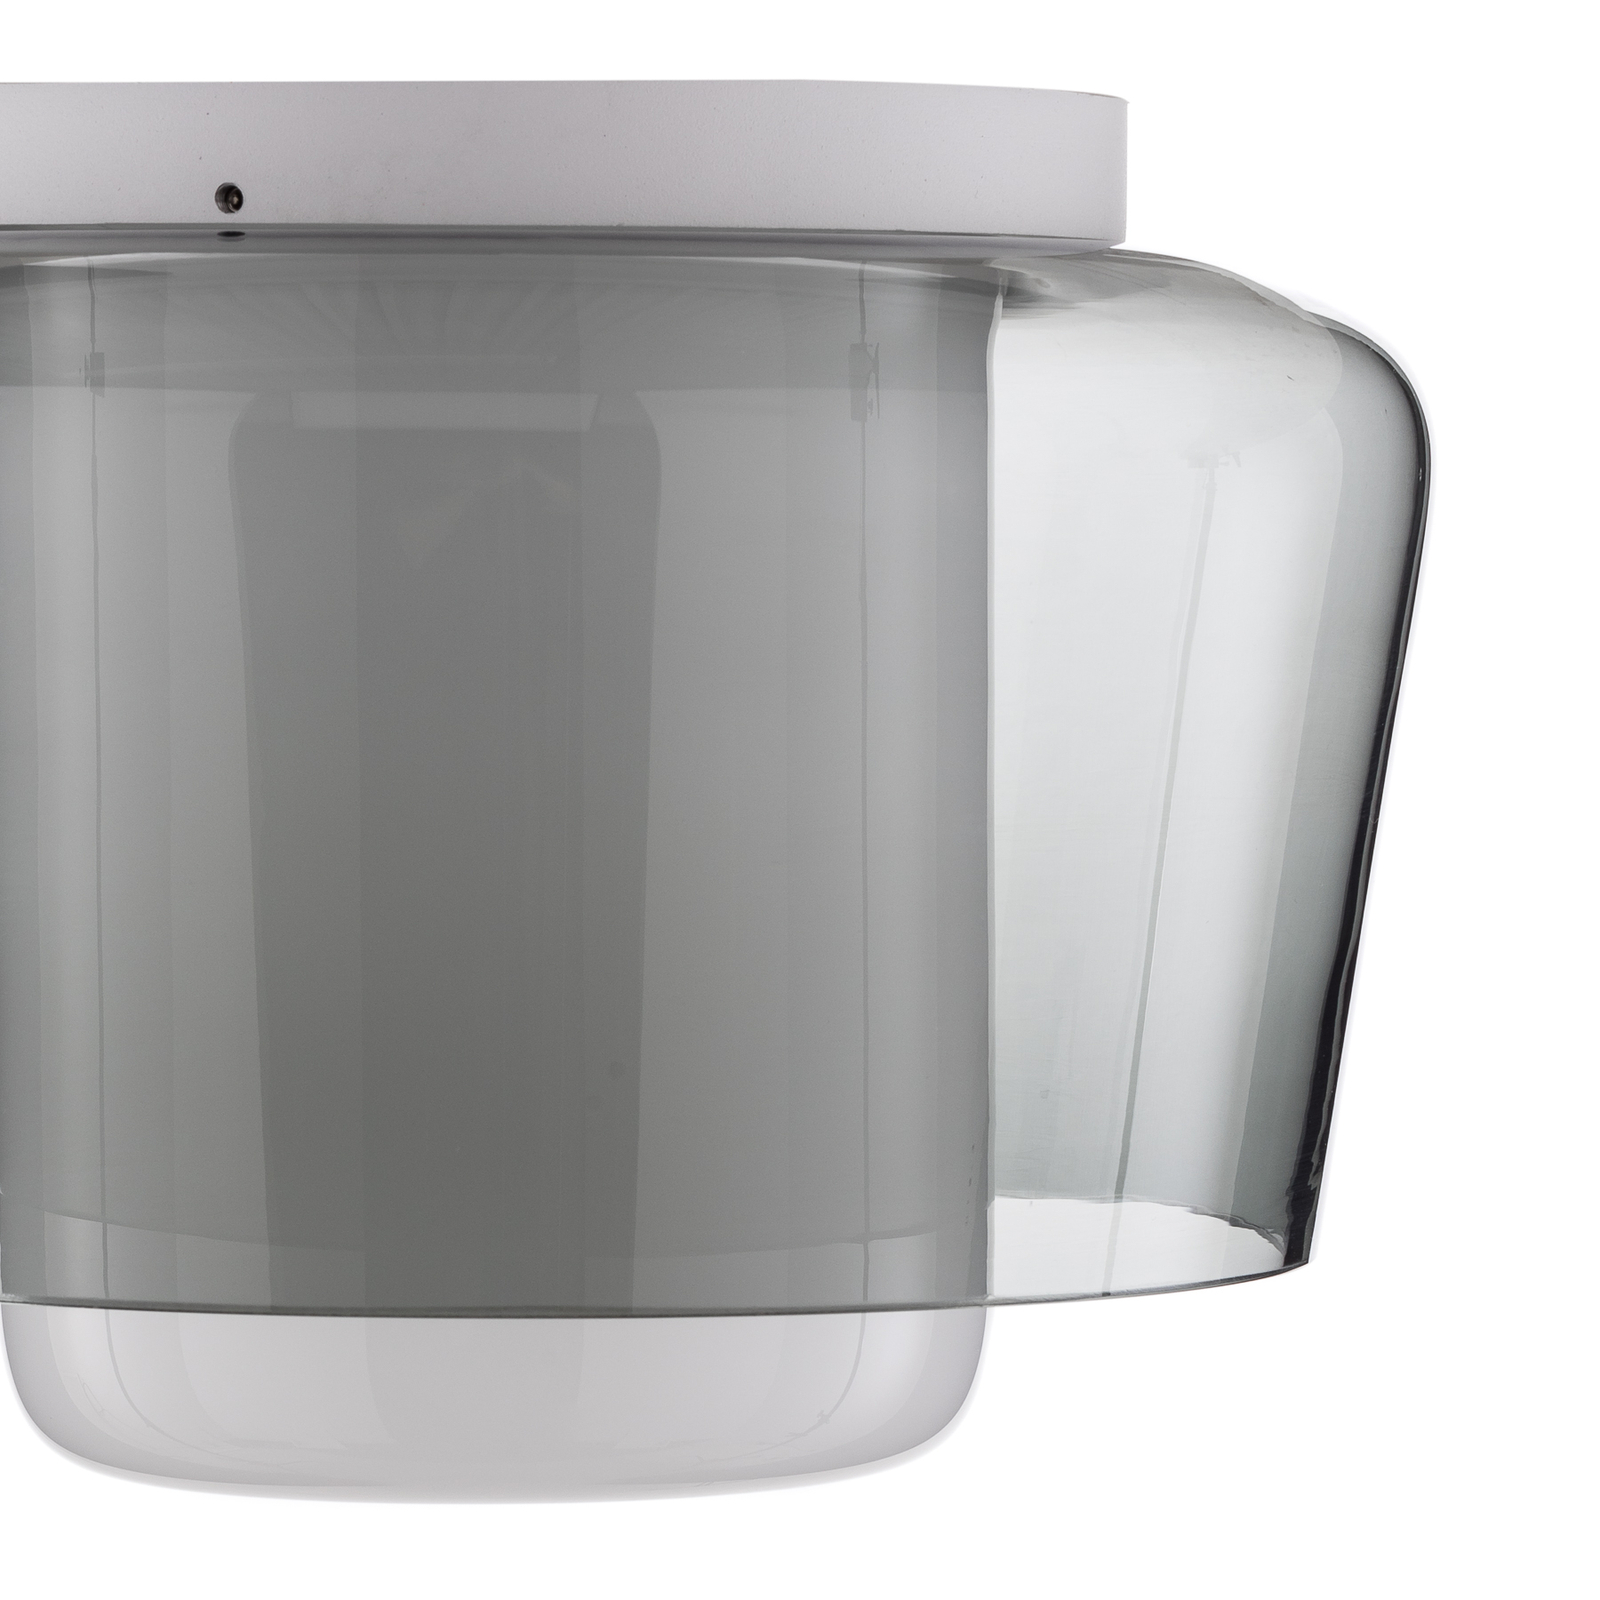 Ceiling light Canio with double glass